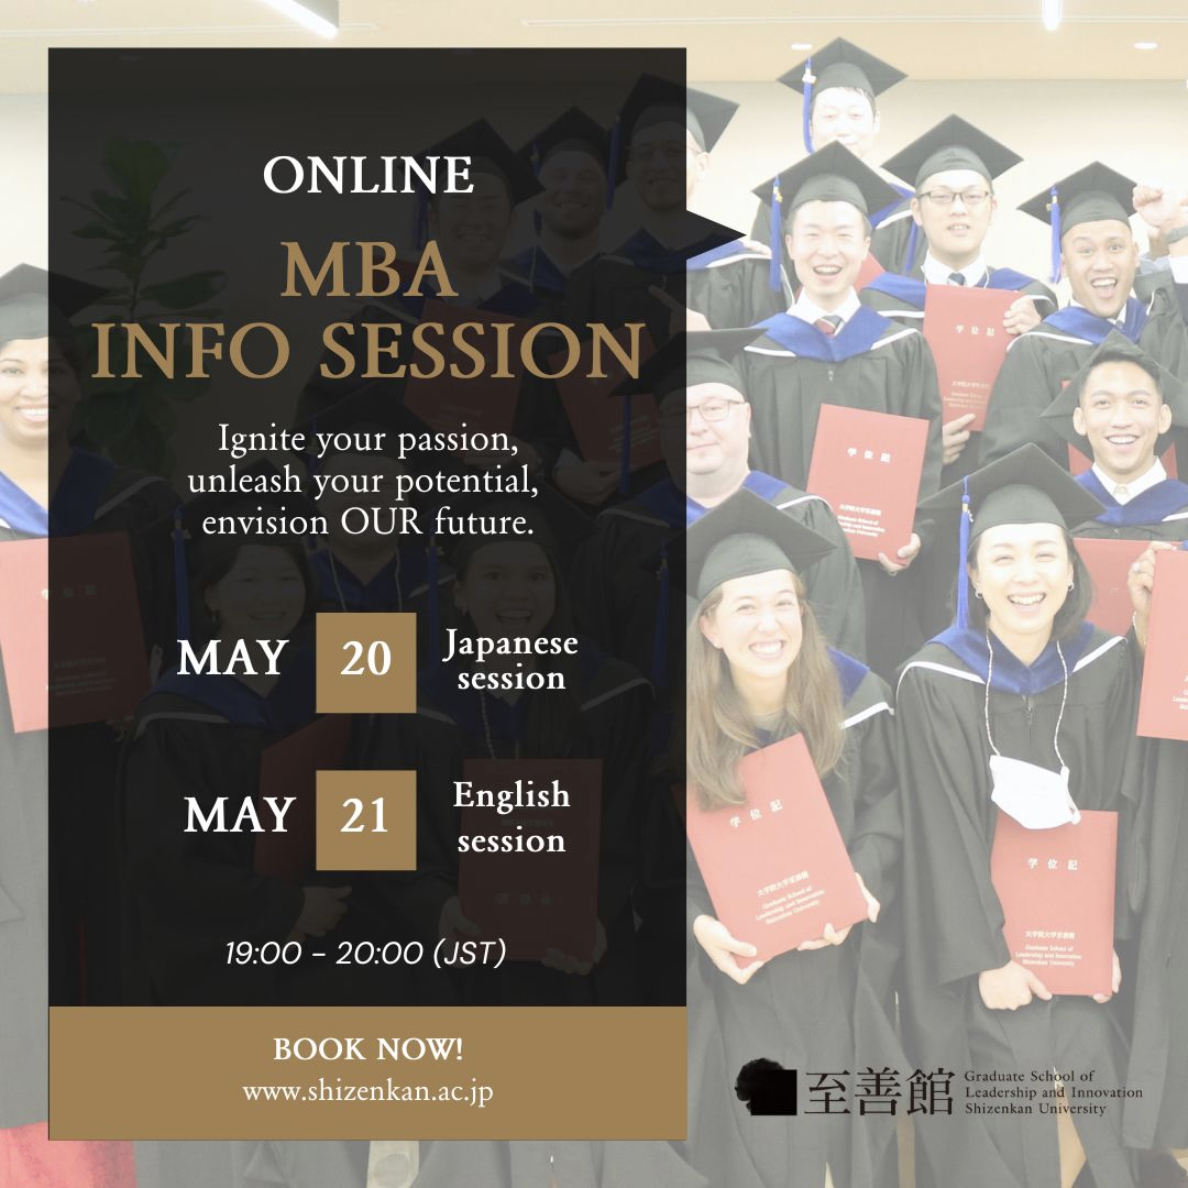 📢@shizenkanunive1 will again be offering 5 'Europa House' scholarships to qualified EU citizens to join its part-time MBA program from summer 2024🇪🇺 Final deadline to apply has been extended to 10 Jun❗️ Info sessions will take place on 20 & 21 May🏫 👇 shizenkan.ac.jp/en/news/schola…